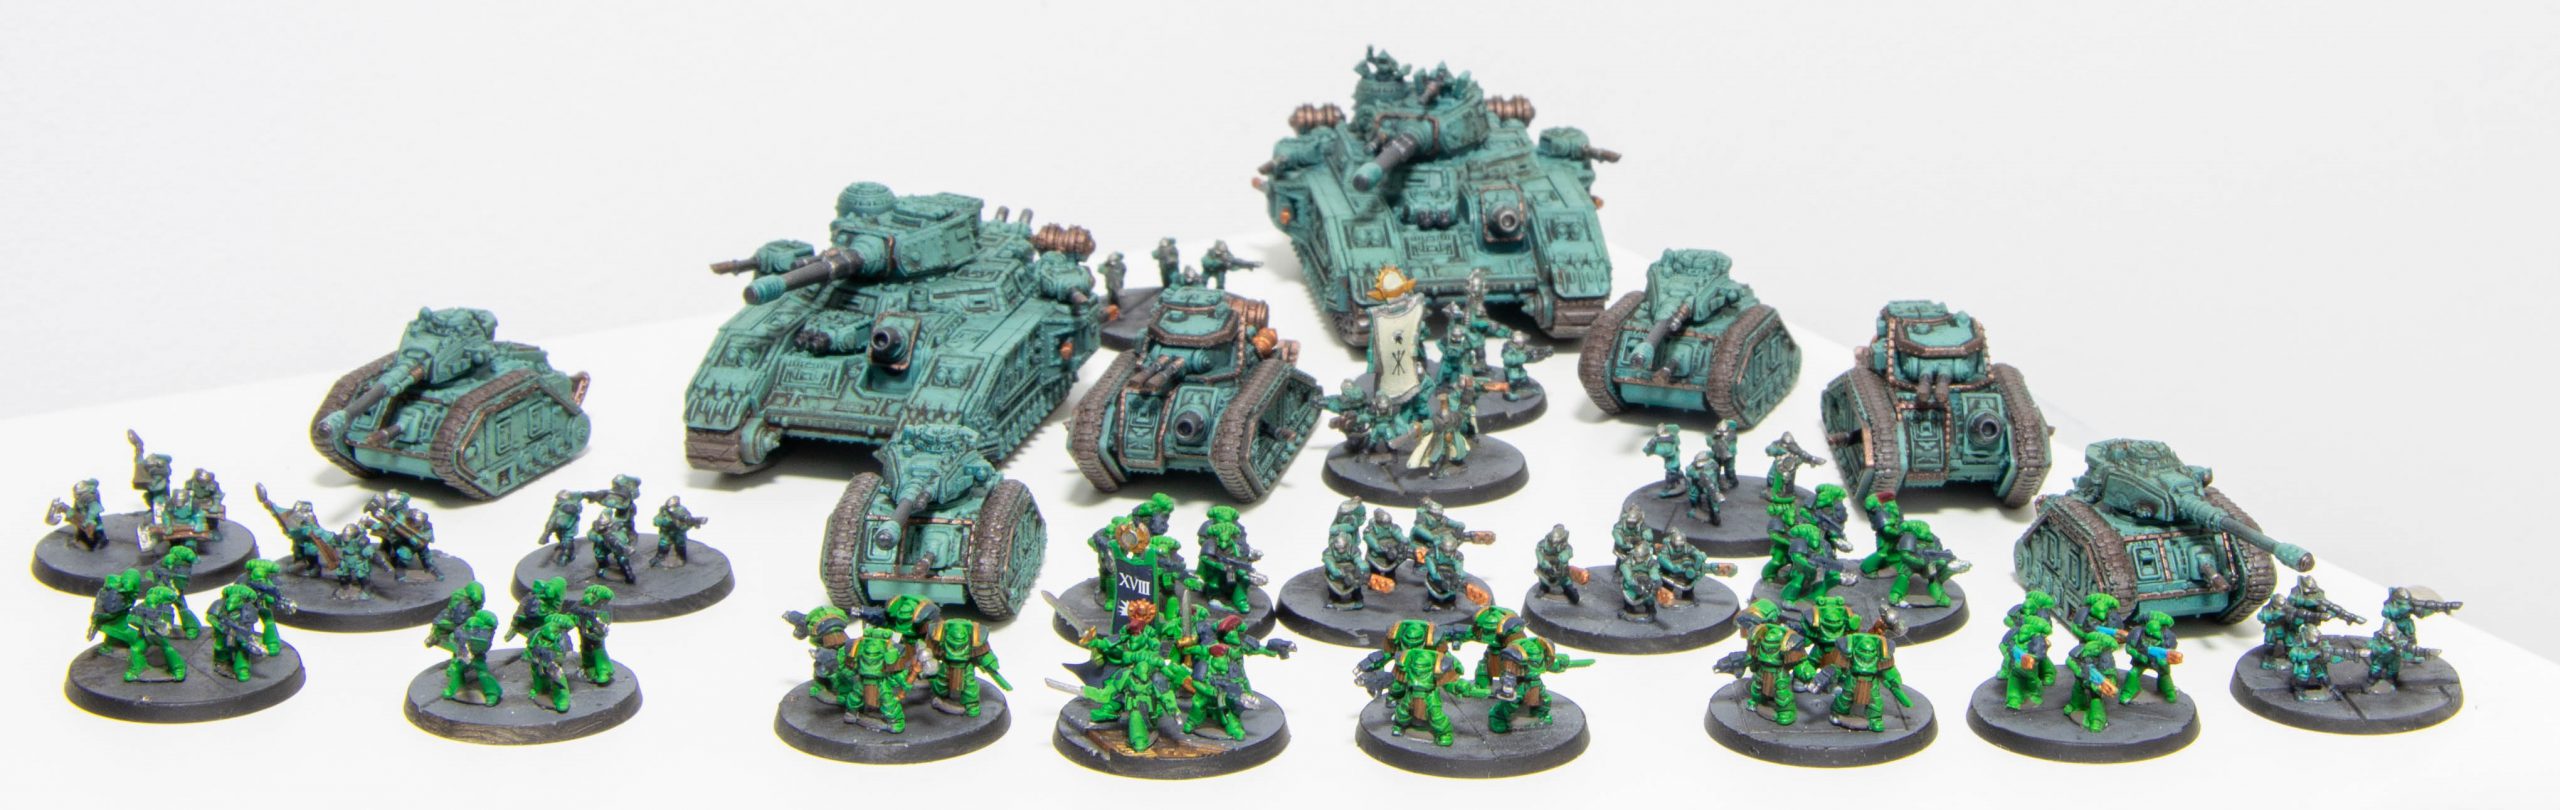 Warhammer The Horus Heresy - Legiones Astartes - Heavy Weapons Upgrade Set  - Missile Launchers & Heavy Bolters - Discount Games Inc